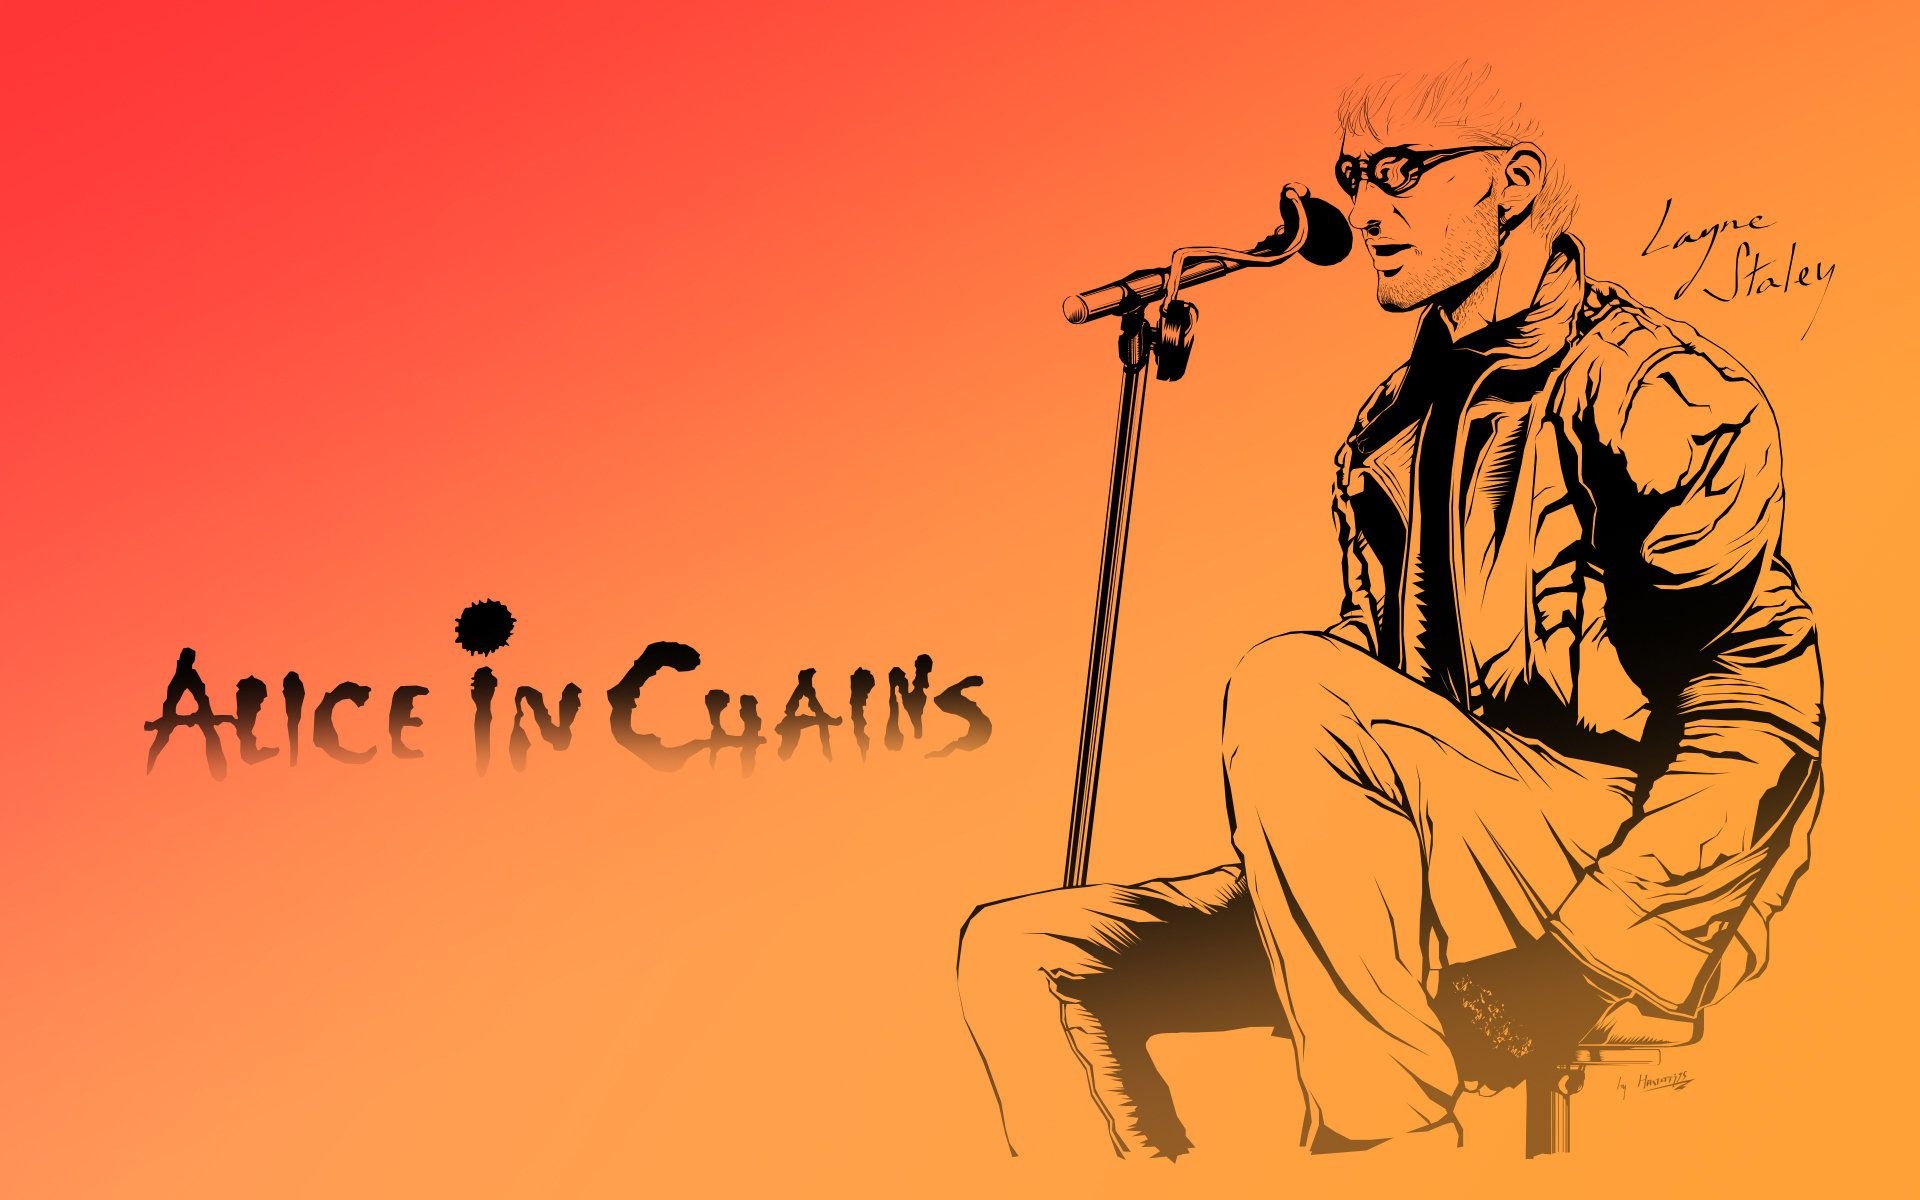 Layne Staley, Vectorial art, Alice in Chains, Band posters, 1920x1200 HD Desktop